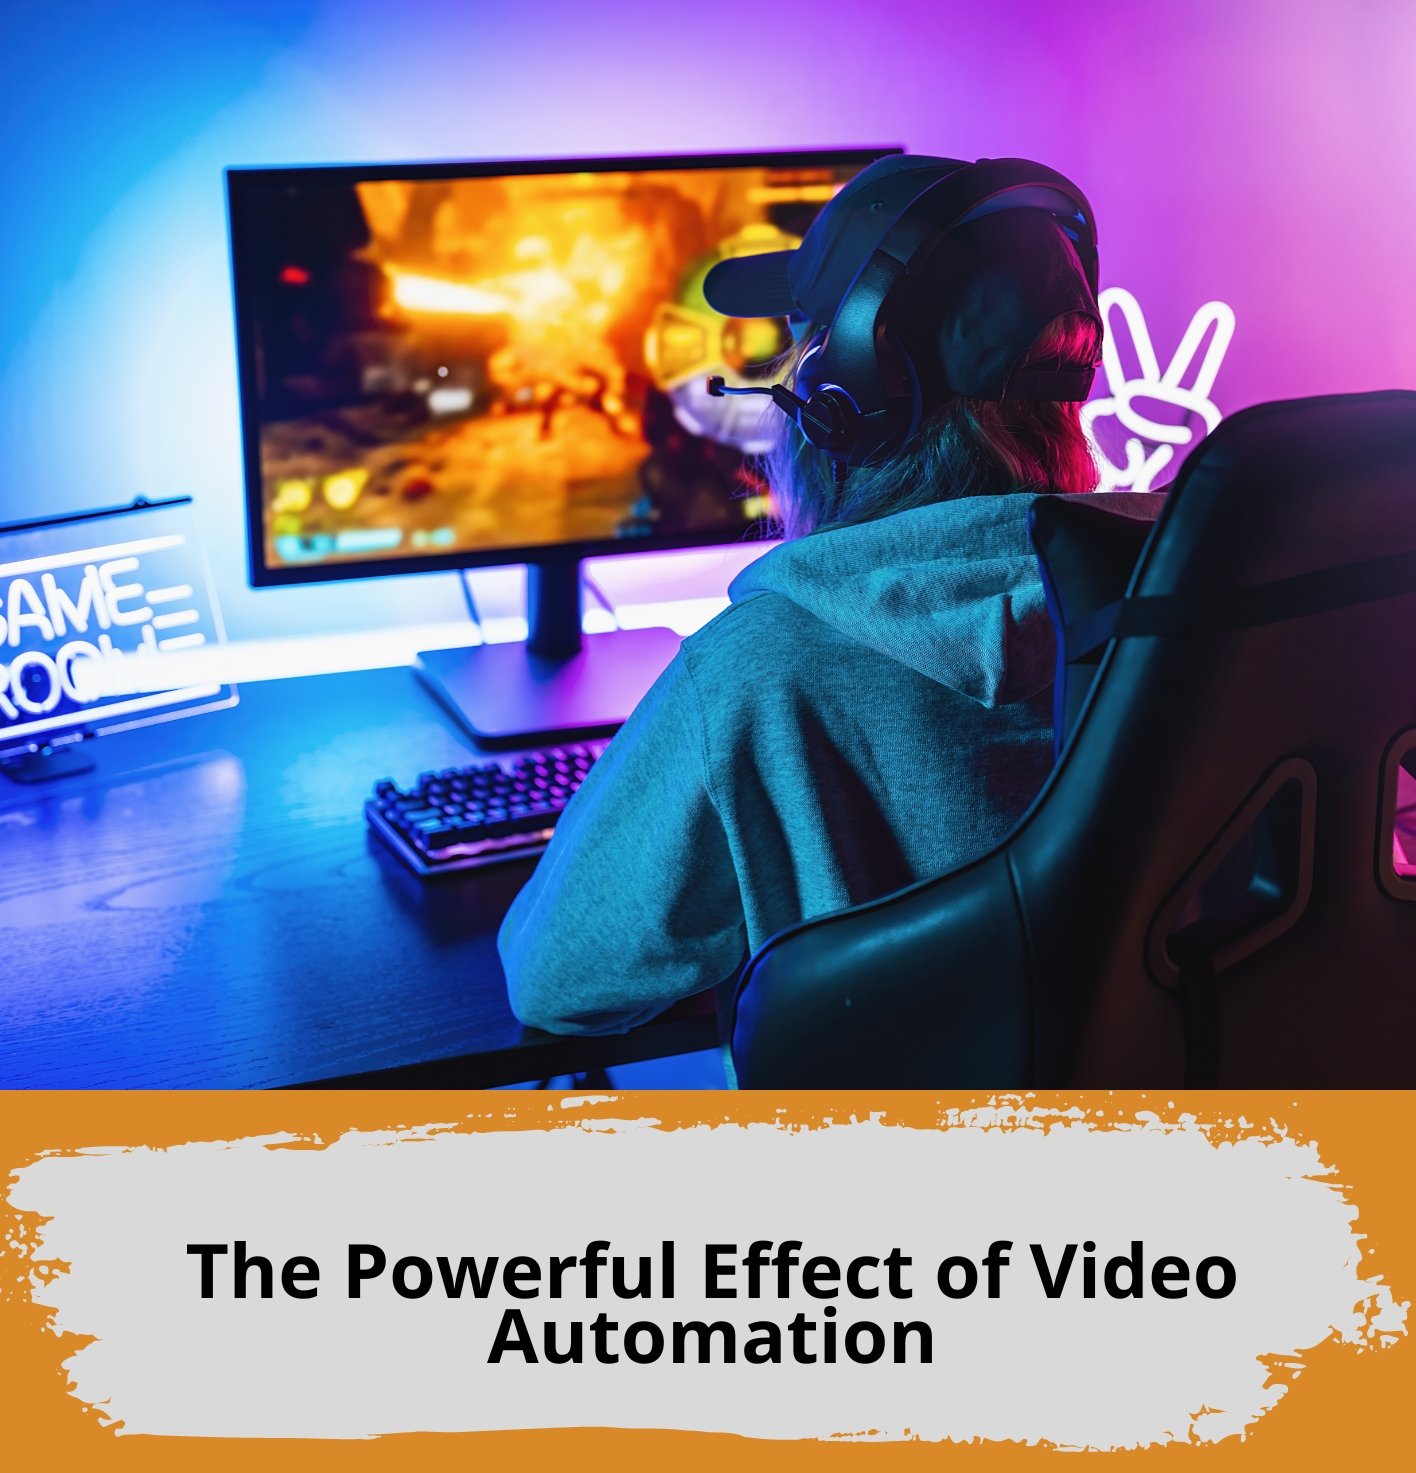 The Powerful Effect of Video Automation